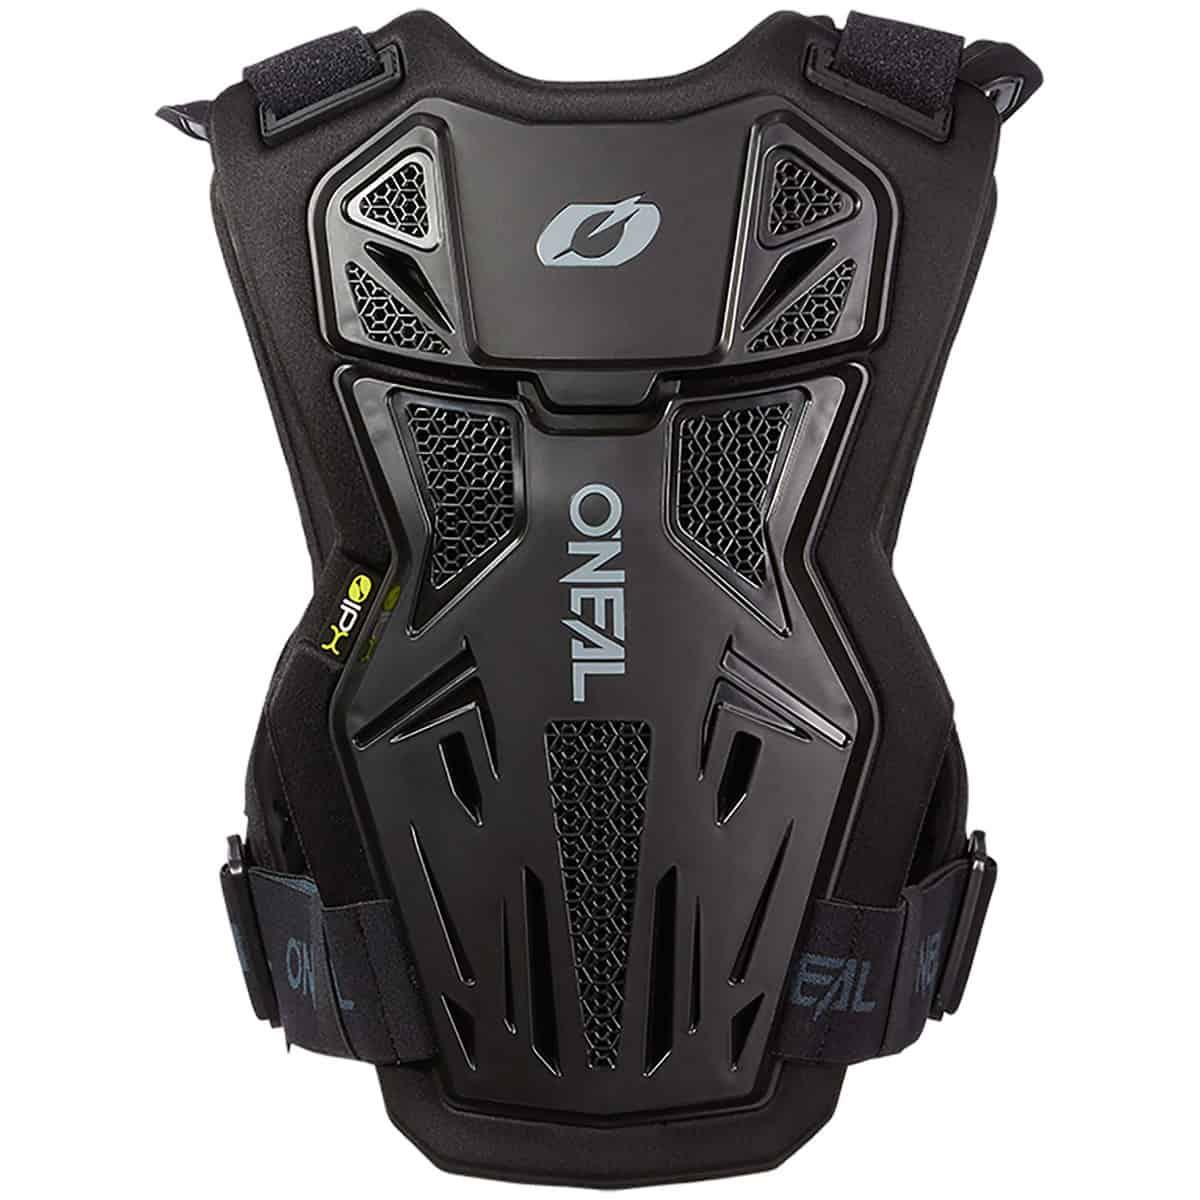 This Split Lite chest protector from ONeal provides both impact protection and a barrier between you and loose stones-2